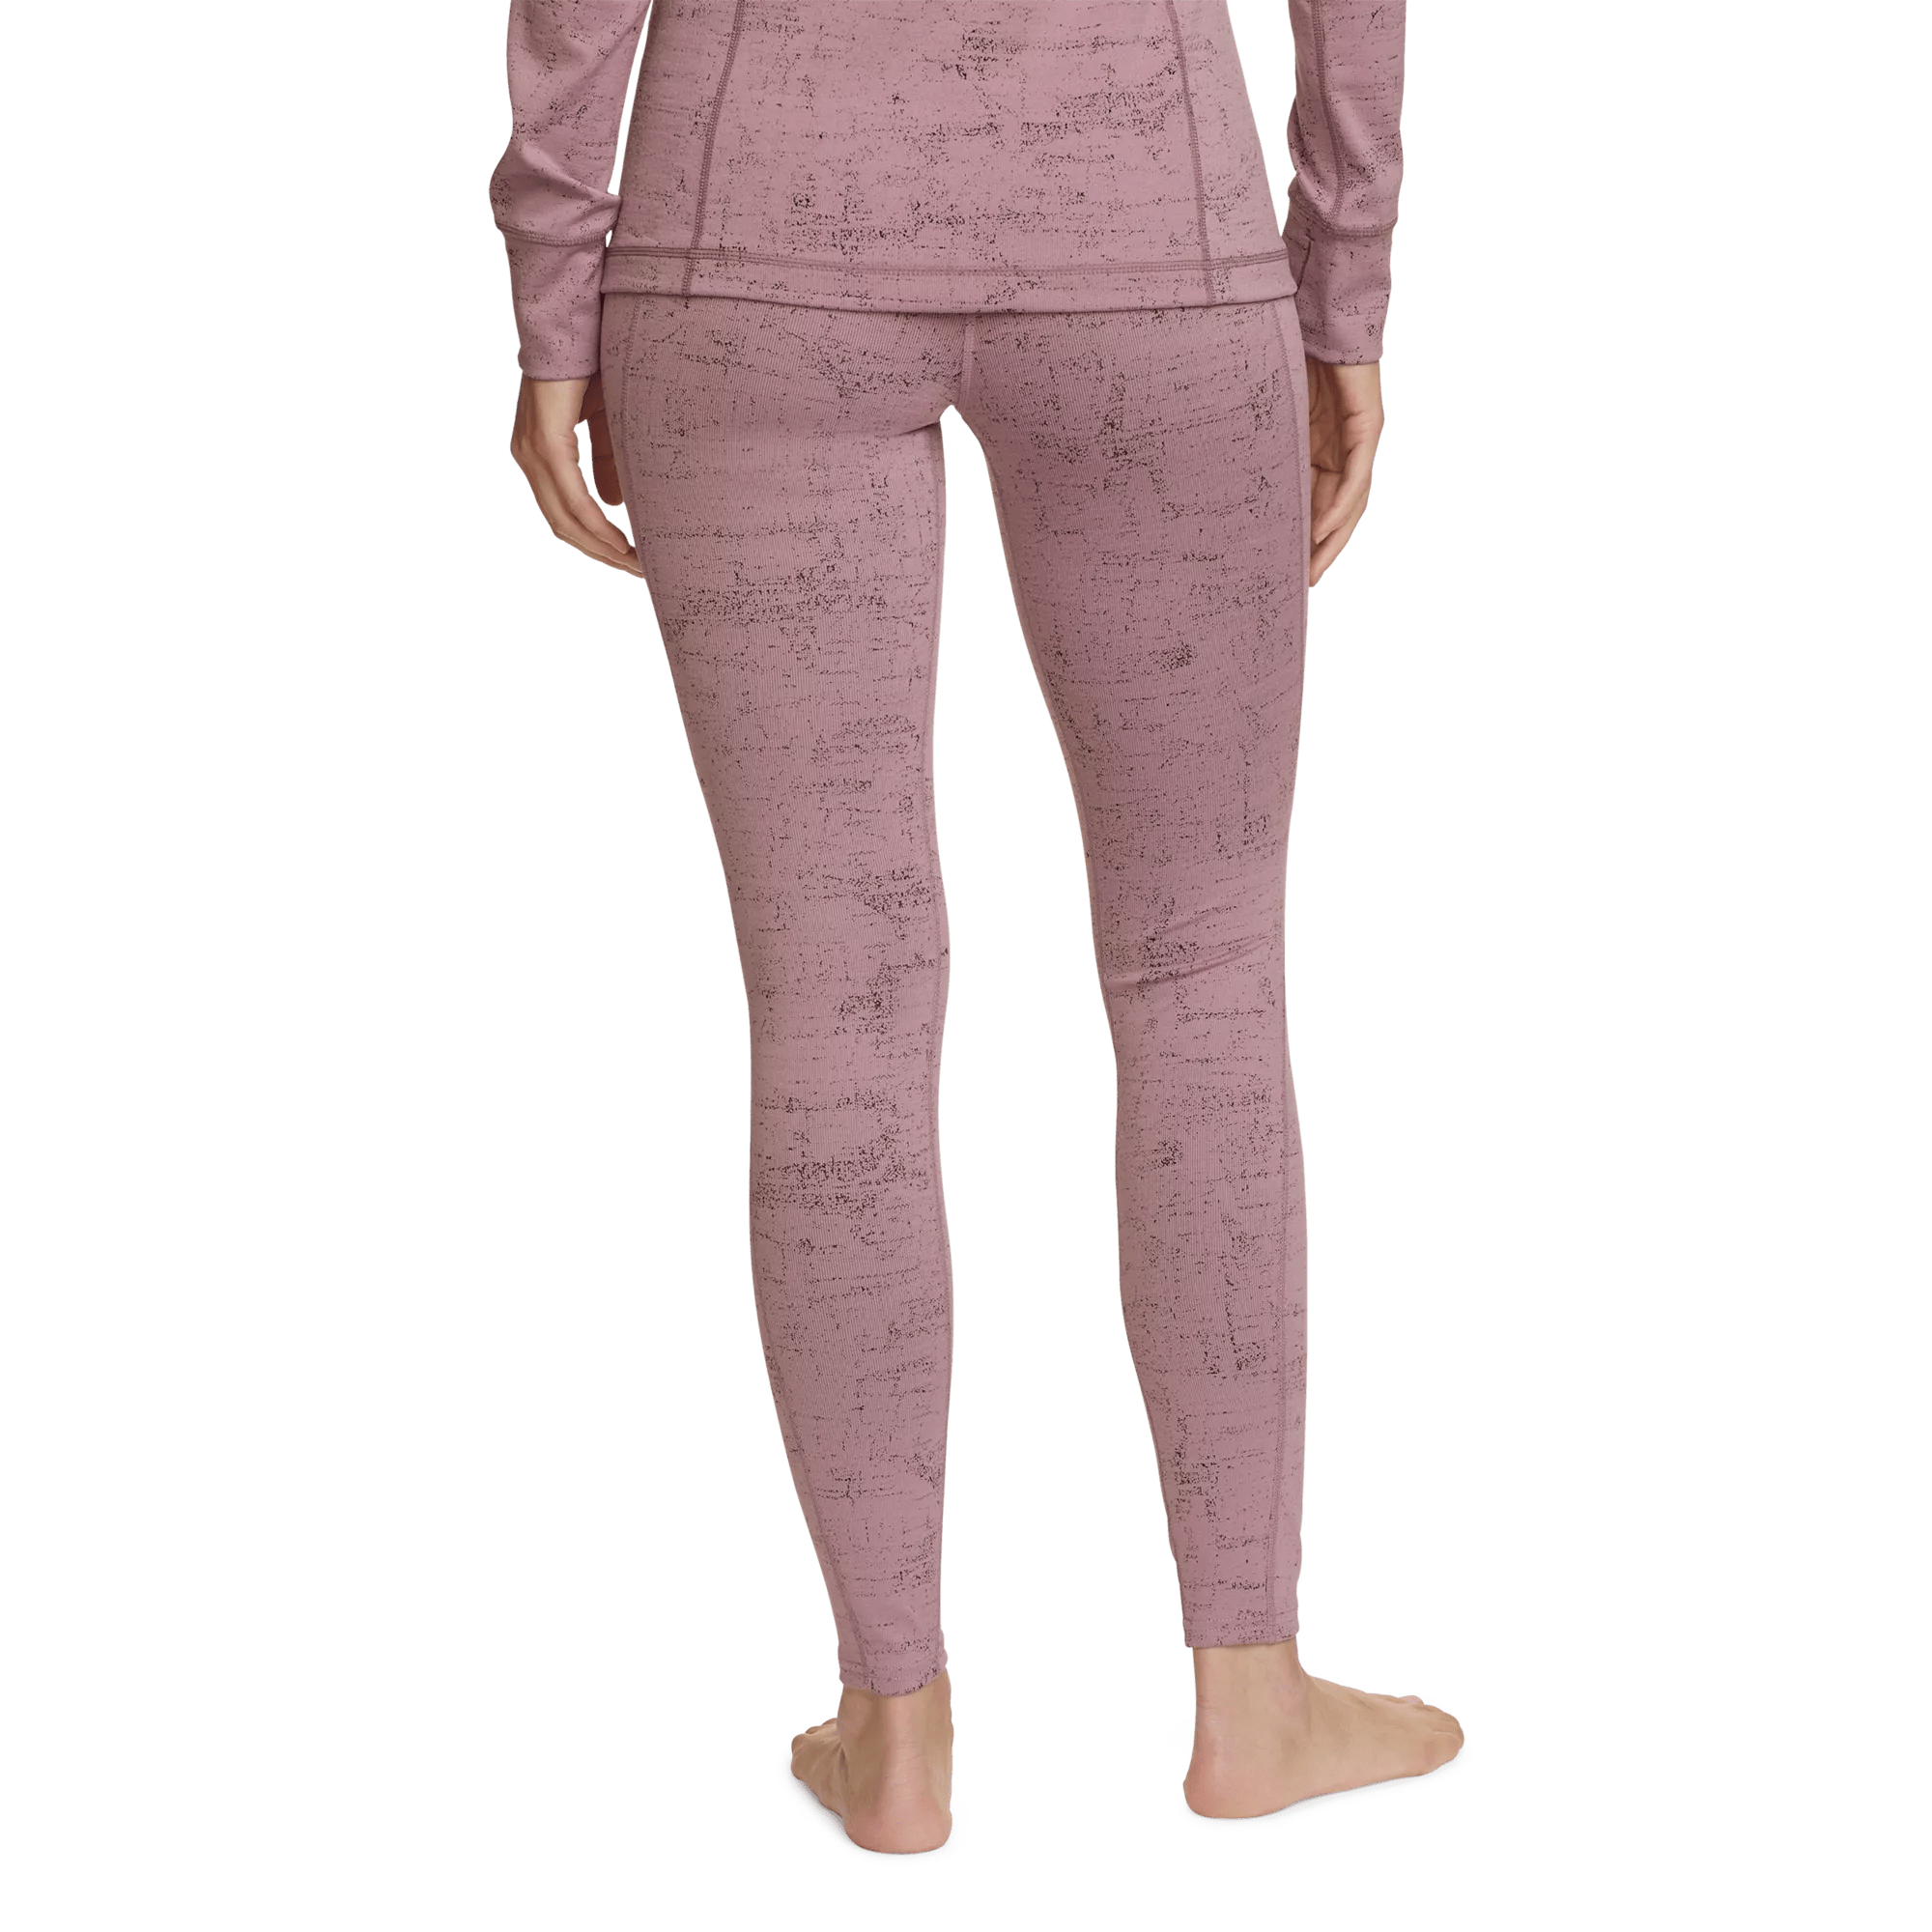 Downslope Tights